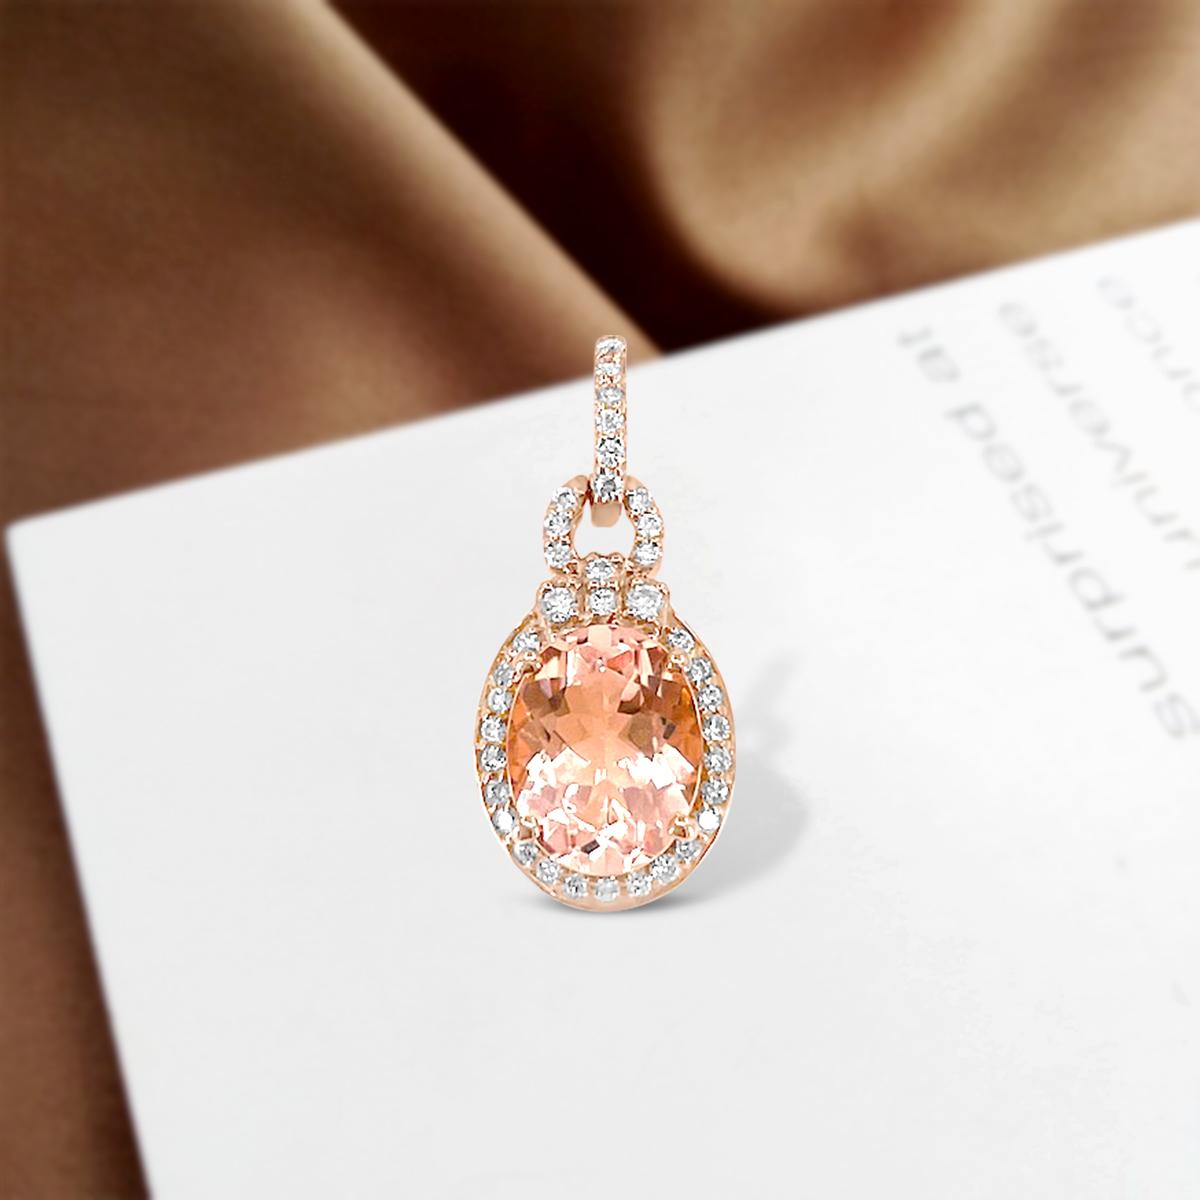 This Oval Shaped Marvelous Morganite Gemstone Pendant.Created in 14K Rose Gold, Showcases a 9x7mm Pale Pink Morganite with Diamonds.
This Charming Gemstone Fashion Pendant Make a Sparkling Statement of Style.

Style# TS1128MOP
Morganite: Oval 9x7mm